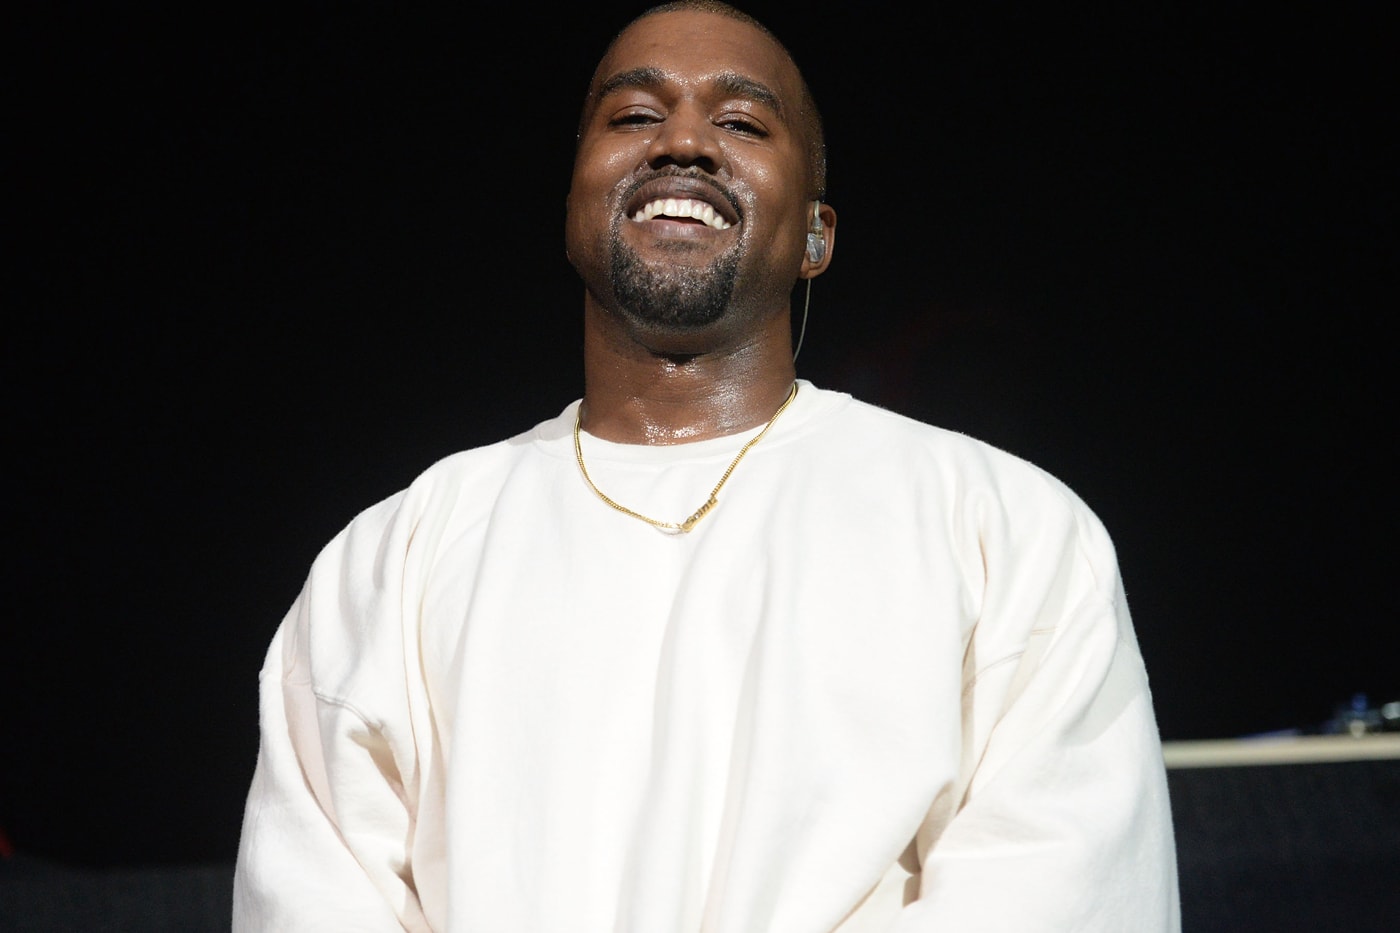 kanye-west-to-perform-on-saturday-night-live-soon